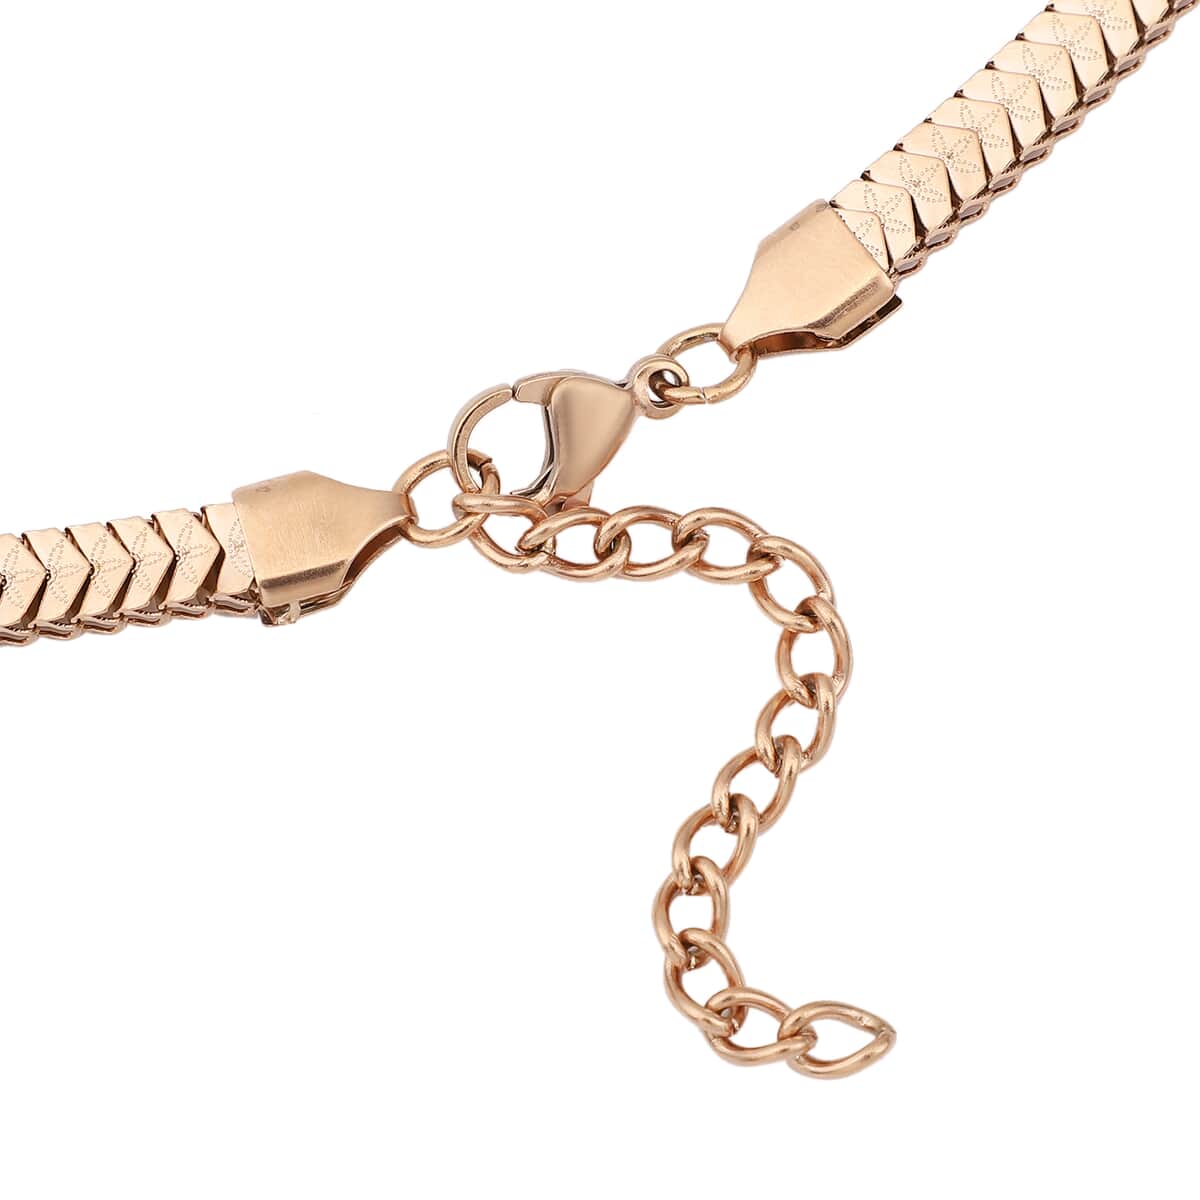 Shrimp Chain Necklace (24-26 Inches) in ION Plated RG Stainless Steel (20.50 g) image number 4